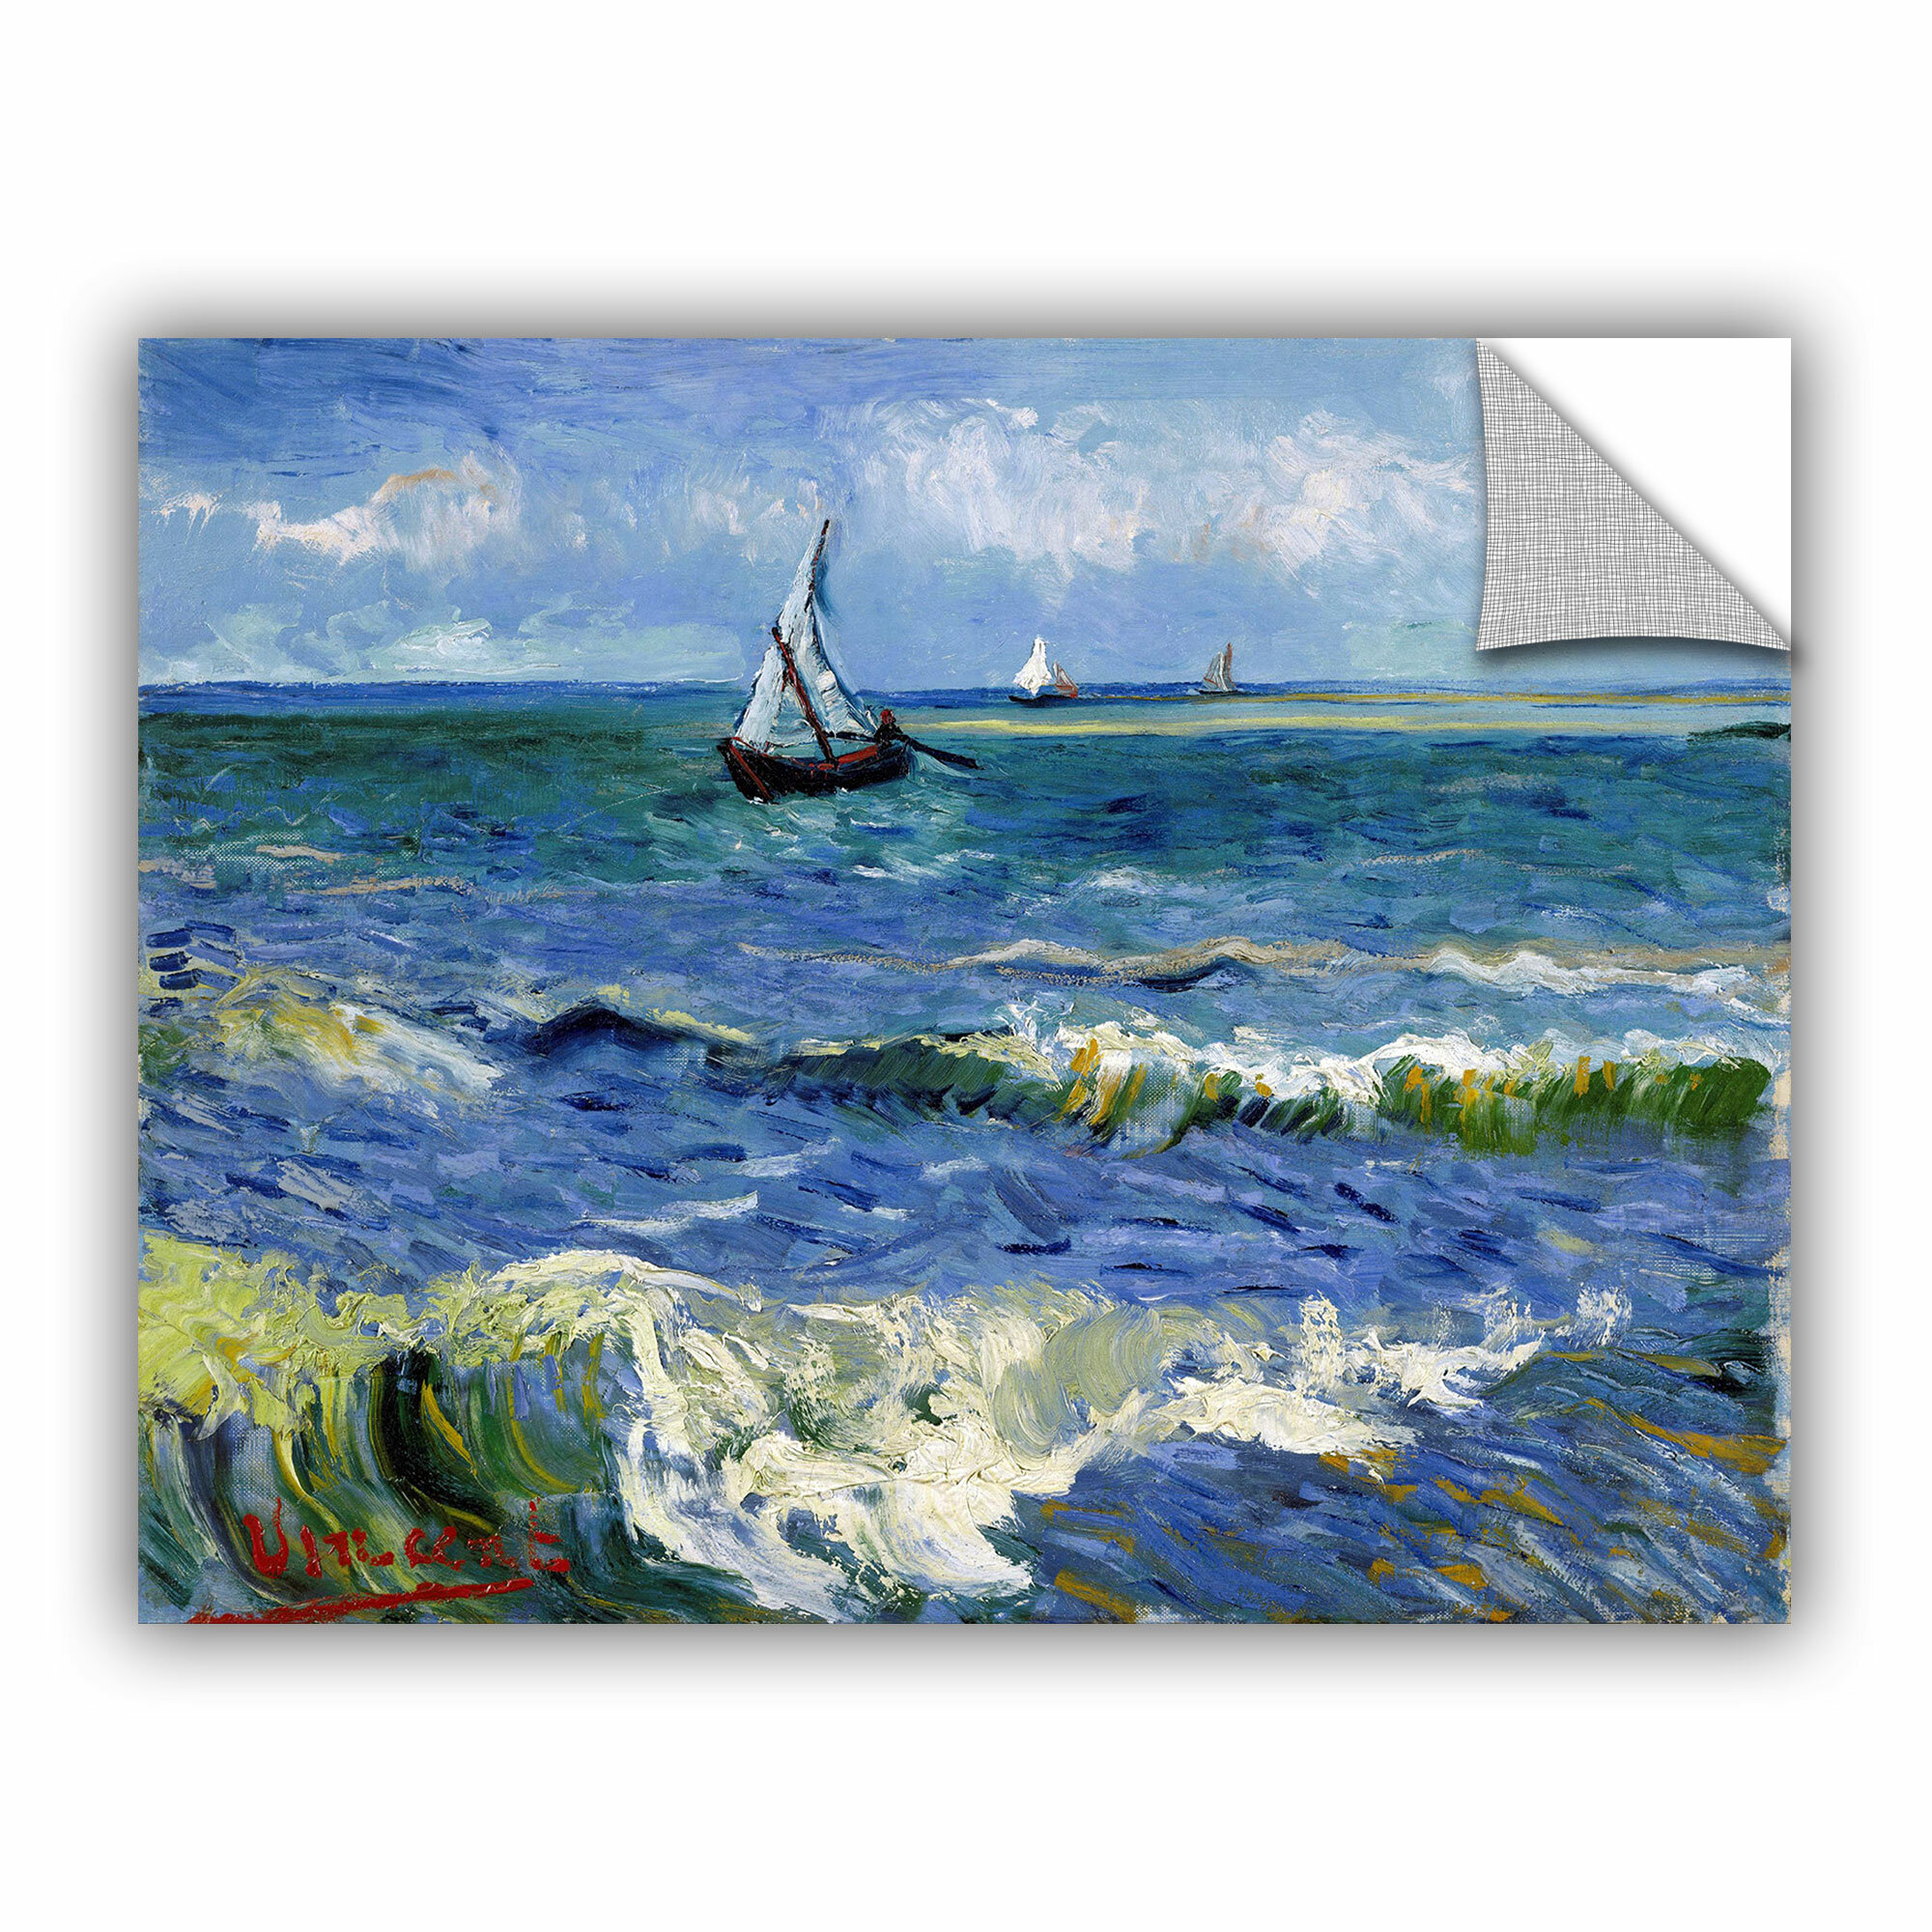 Multicolor ArtWall Vincent Vangoghs Seascape at Saintes Maries Art Appealz Removable Graphic Wall Art 24 by 32-Inch 